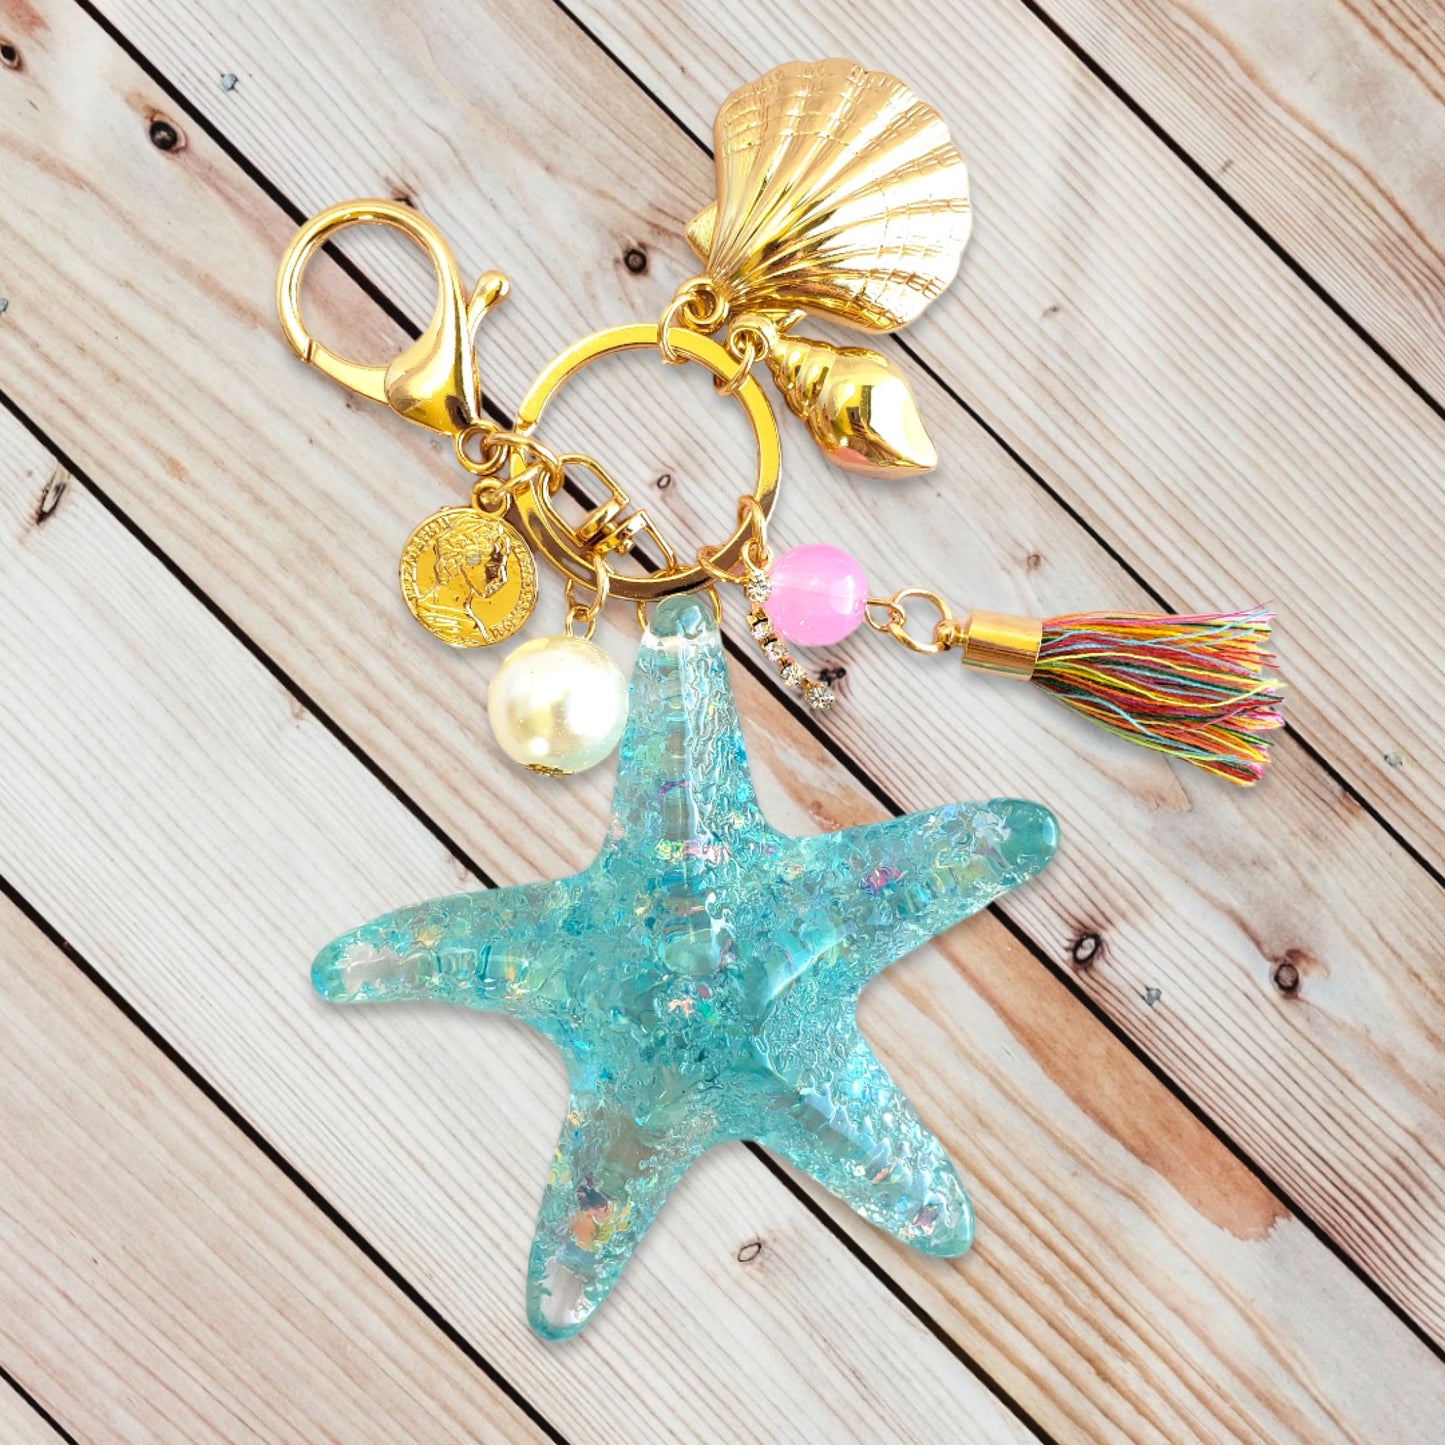 Blue Resin Starfish Tassel Charm Keychain from Confetti Kitty, Only 7.99